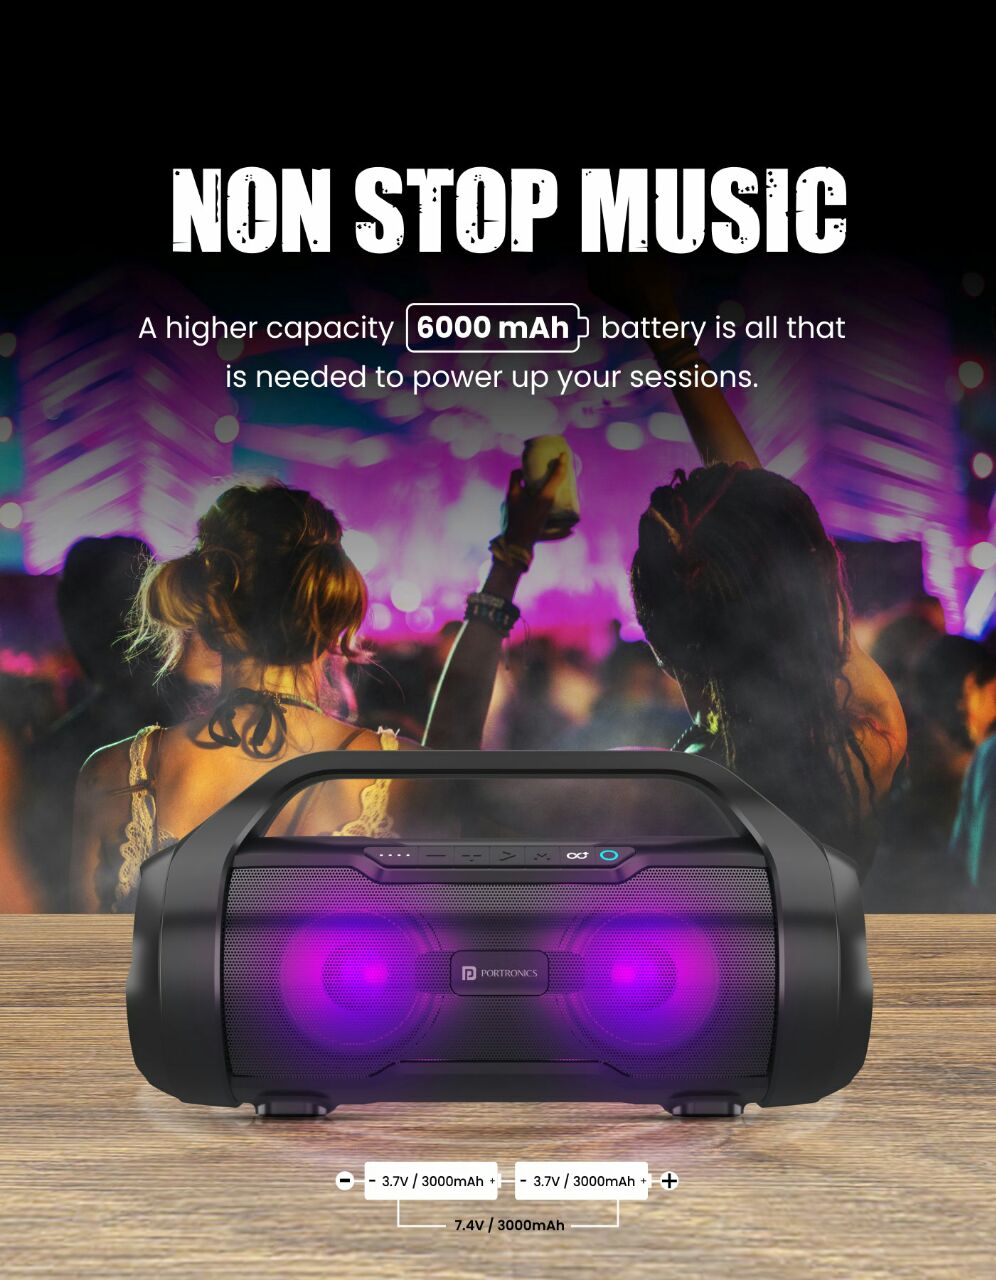 Portronics Dash 12 Bluetooth Party Speaker Launched in India